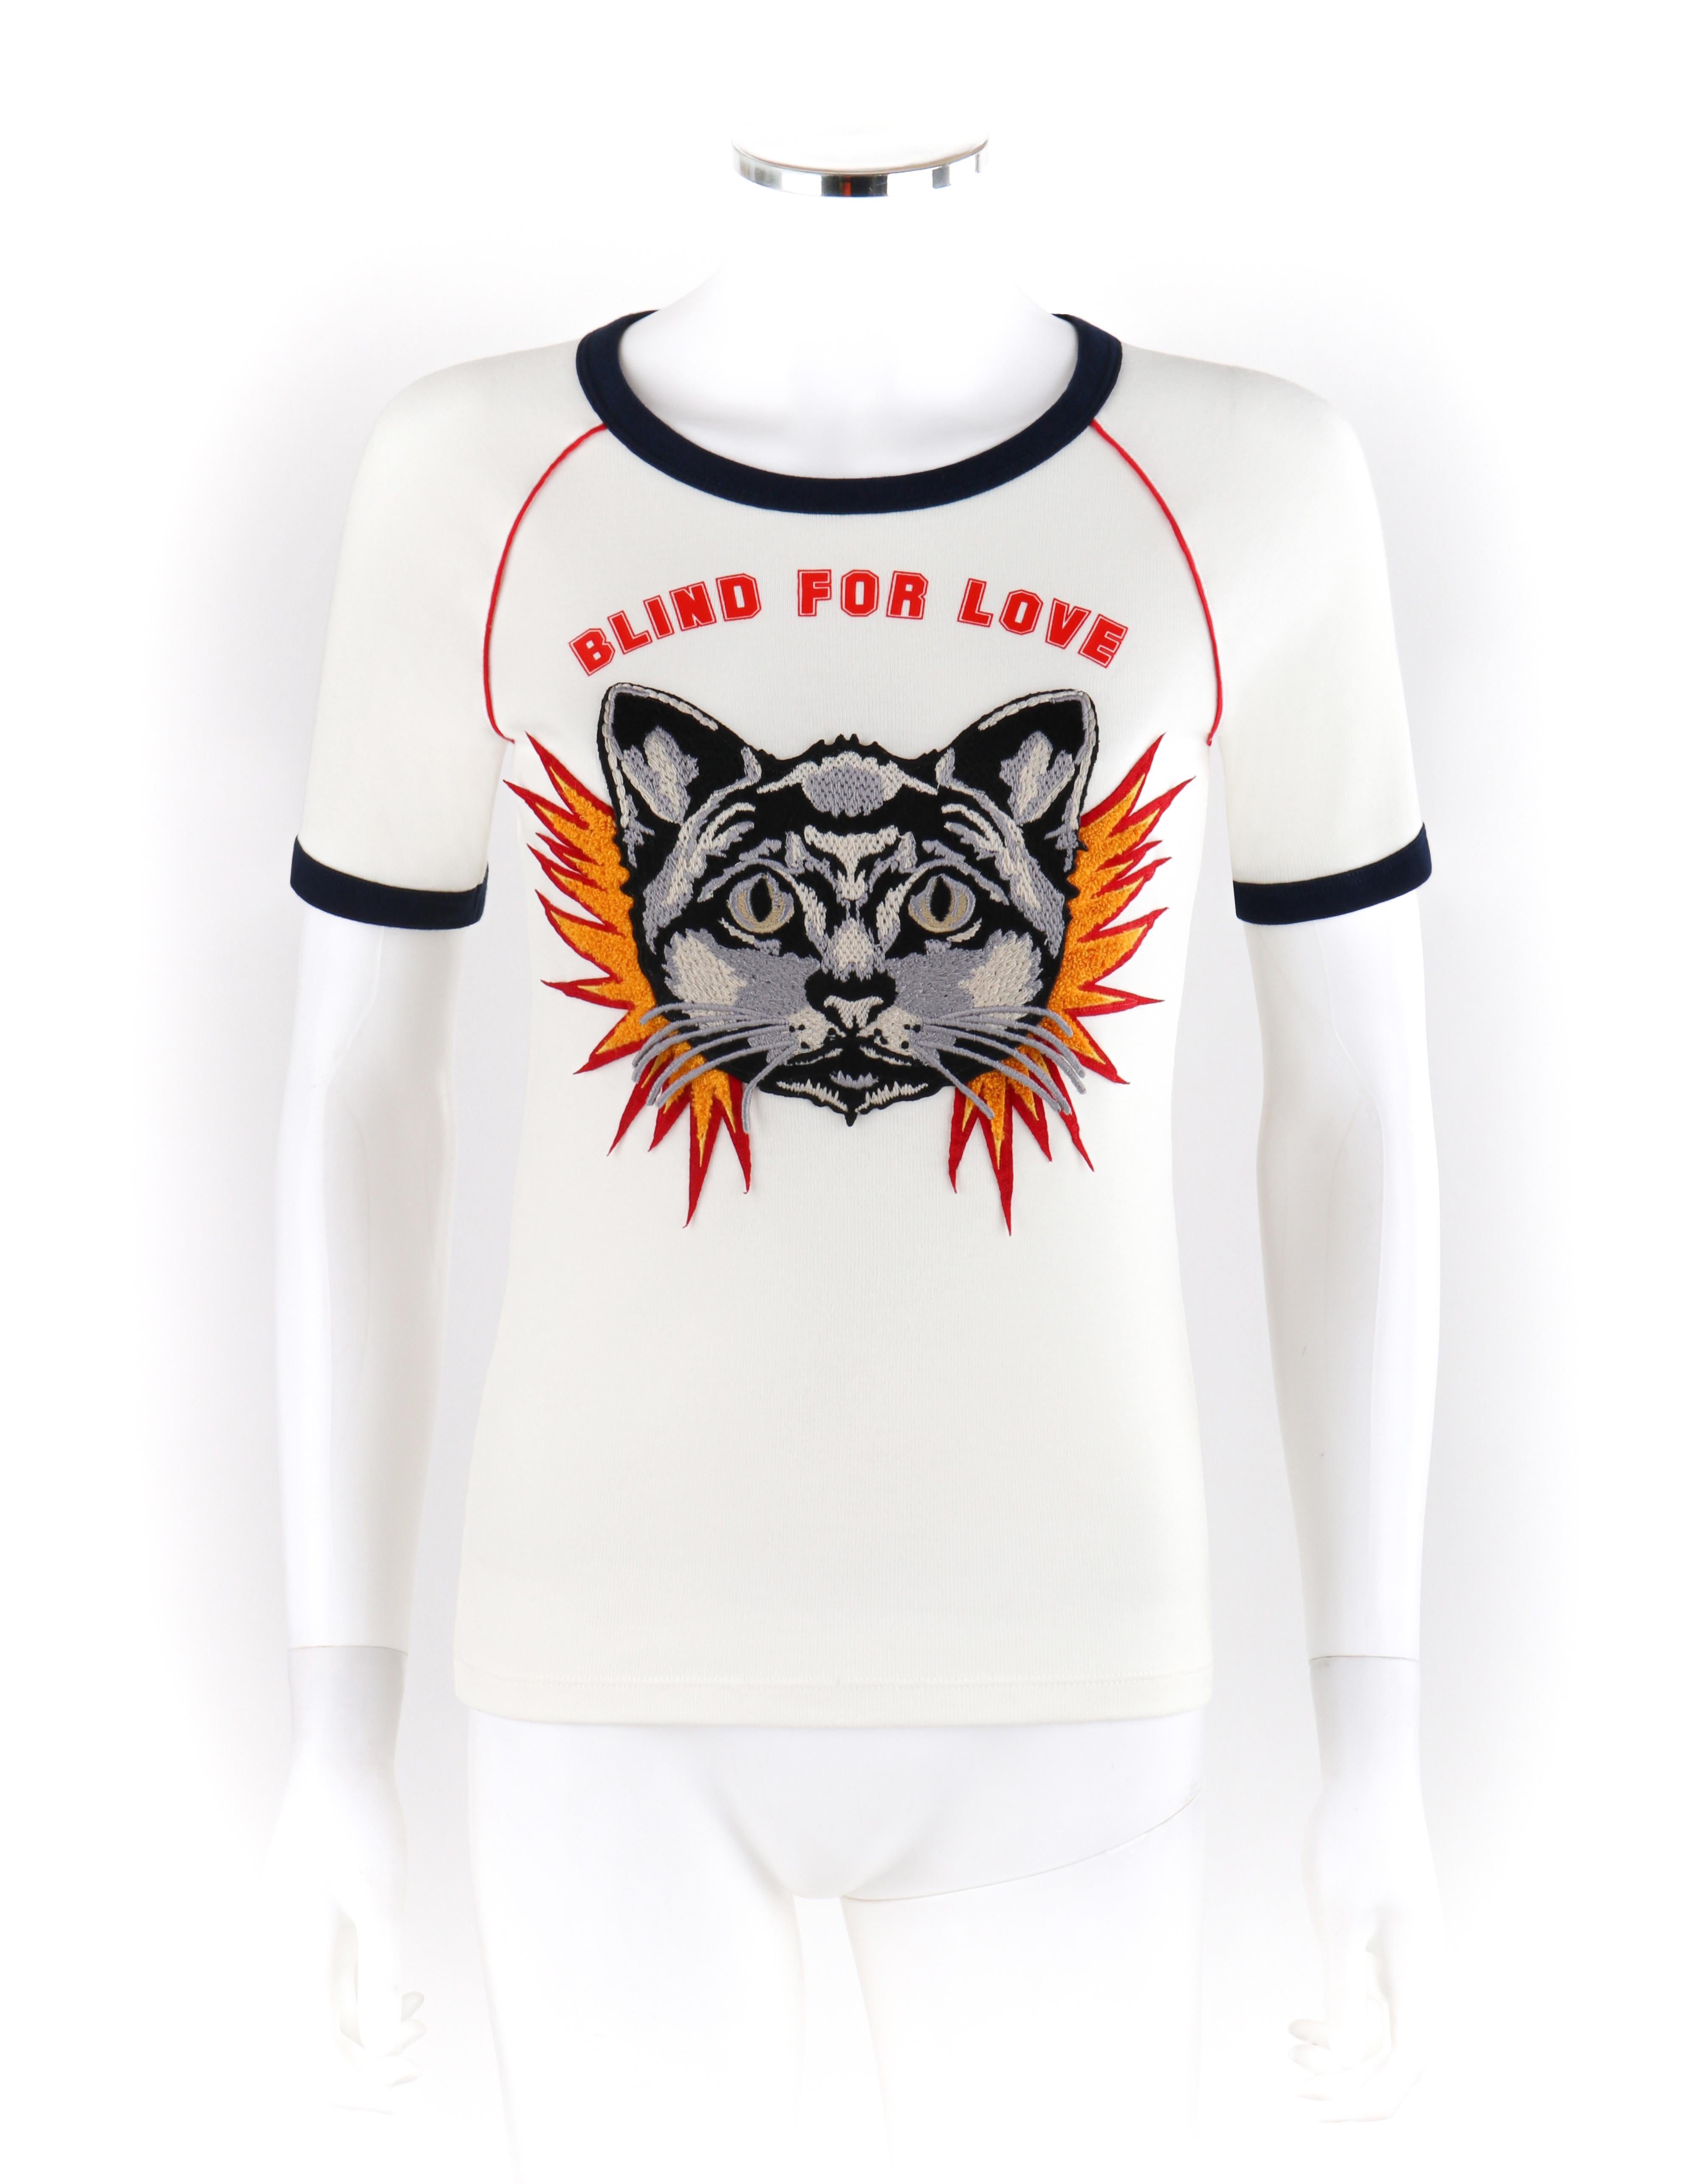 gucci blind for love shirt